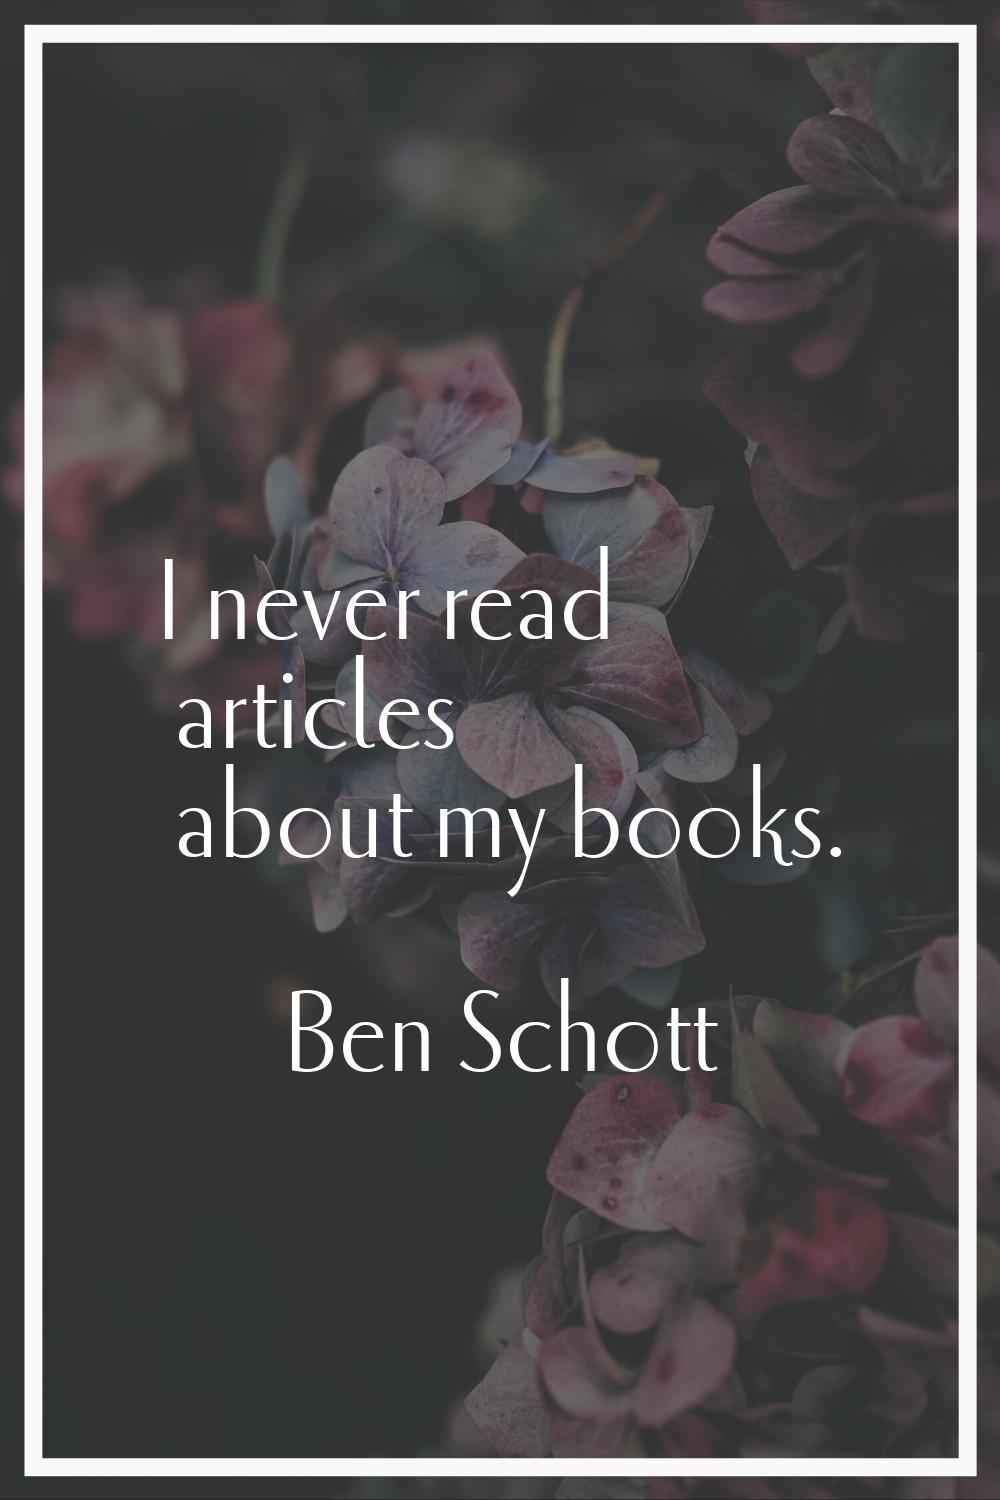 I never read articles about my books.